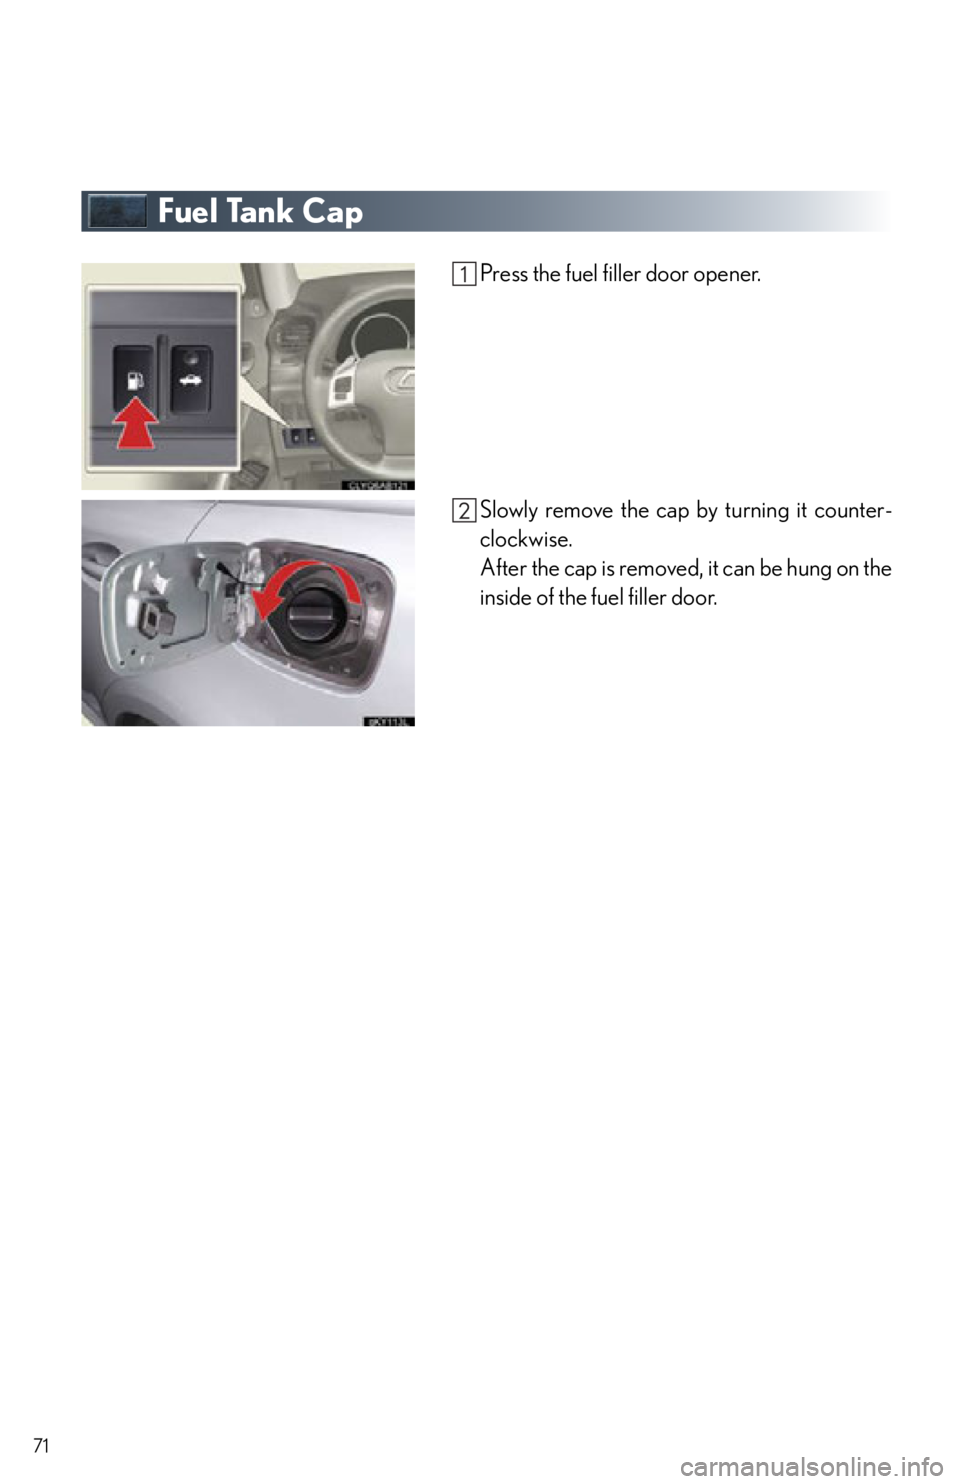 Lexus IS350 2012  Quick Guide / 2012 IS250,IS350 OWNERS MANUAL QUICK GUIDE (OM53A98U) 71
Fuel Tank Cap
Press the fuel filler door opener.
Slowly remove the cap by turning it counter-
clockwise.
After the cap is removed, it can be hung on the
inside of the fuel filler door. 